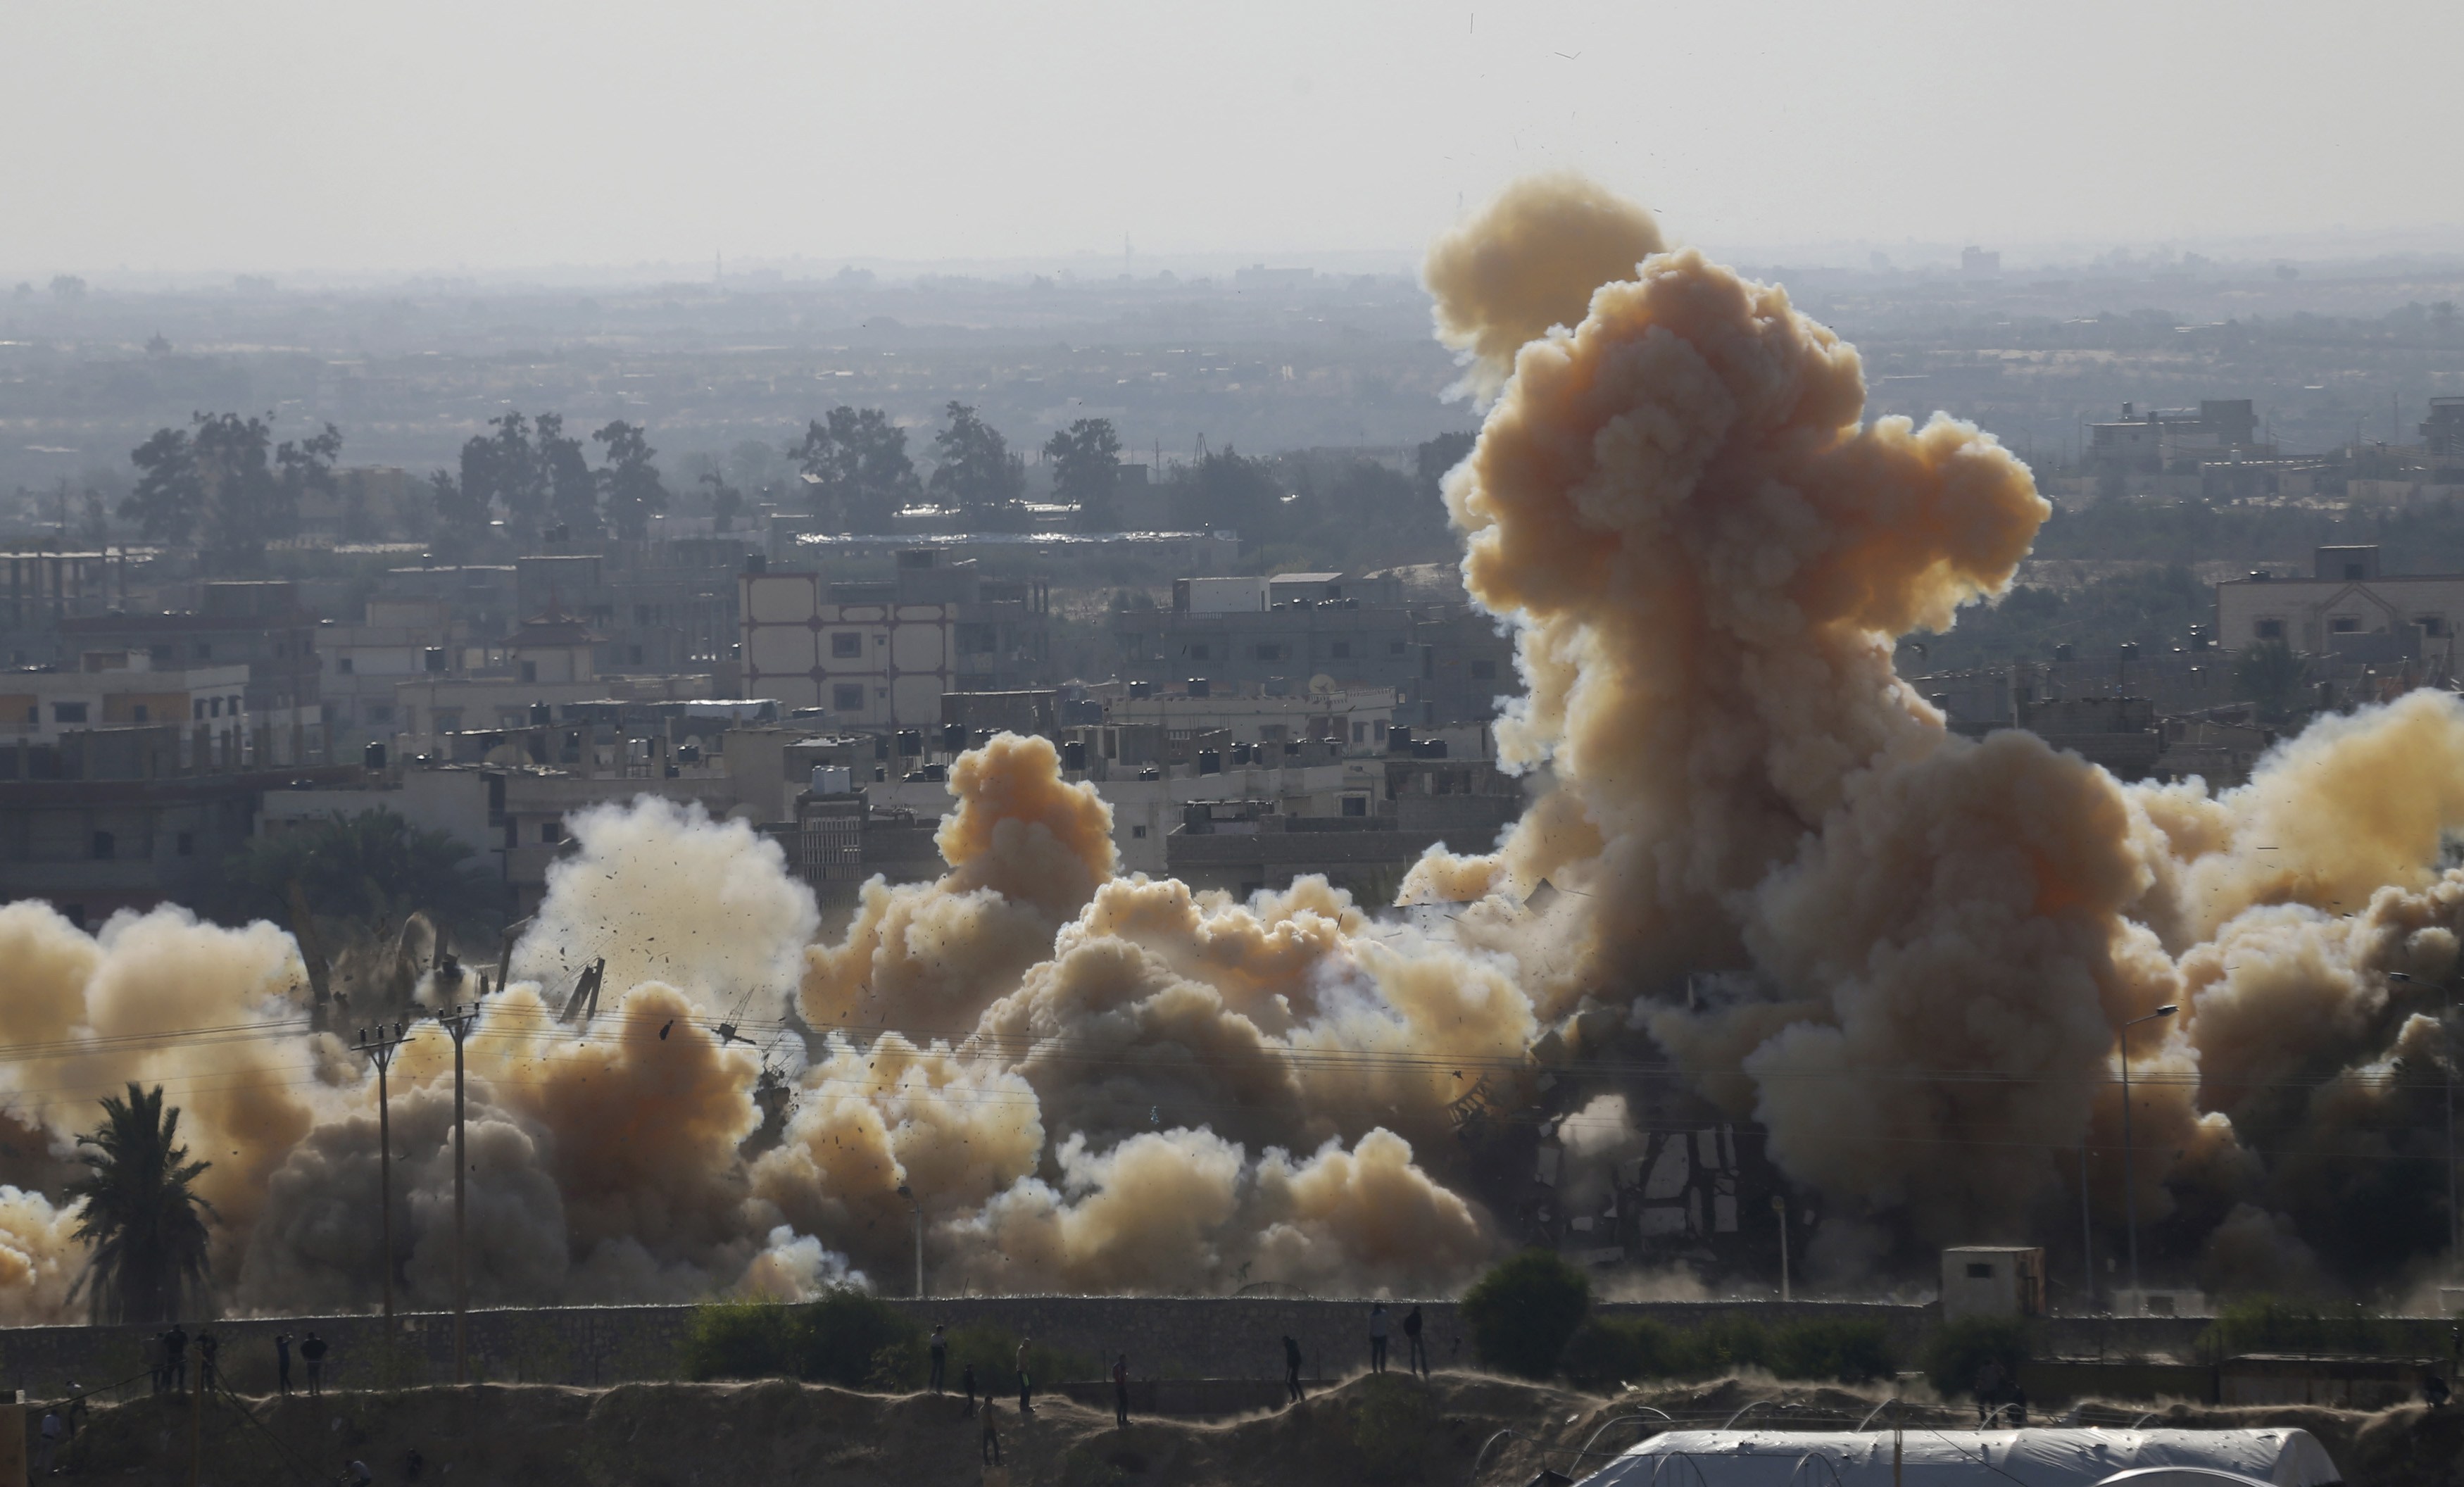 4 security personnel killed in Rafah explosion - military spokesman